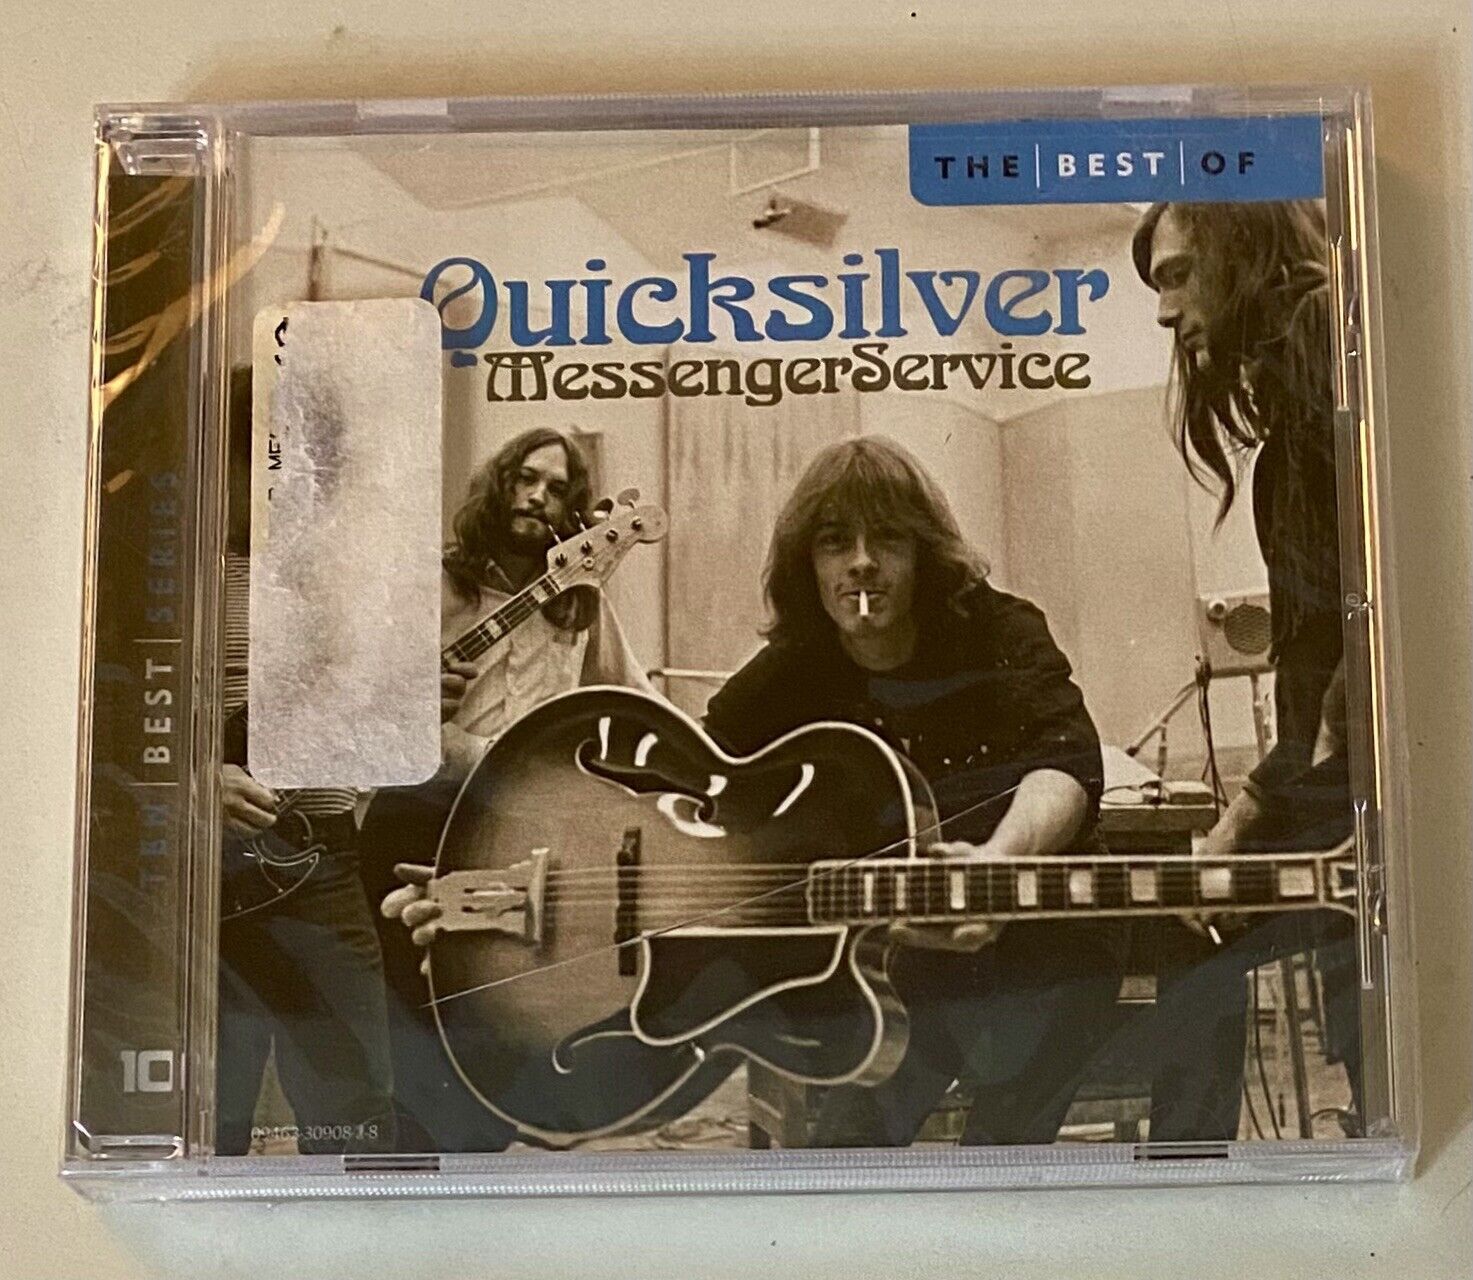 The Best of Quicksilver Messenger Service [Capitol] by Quicksilver NEW SEALED